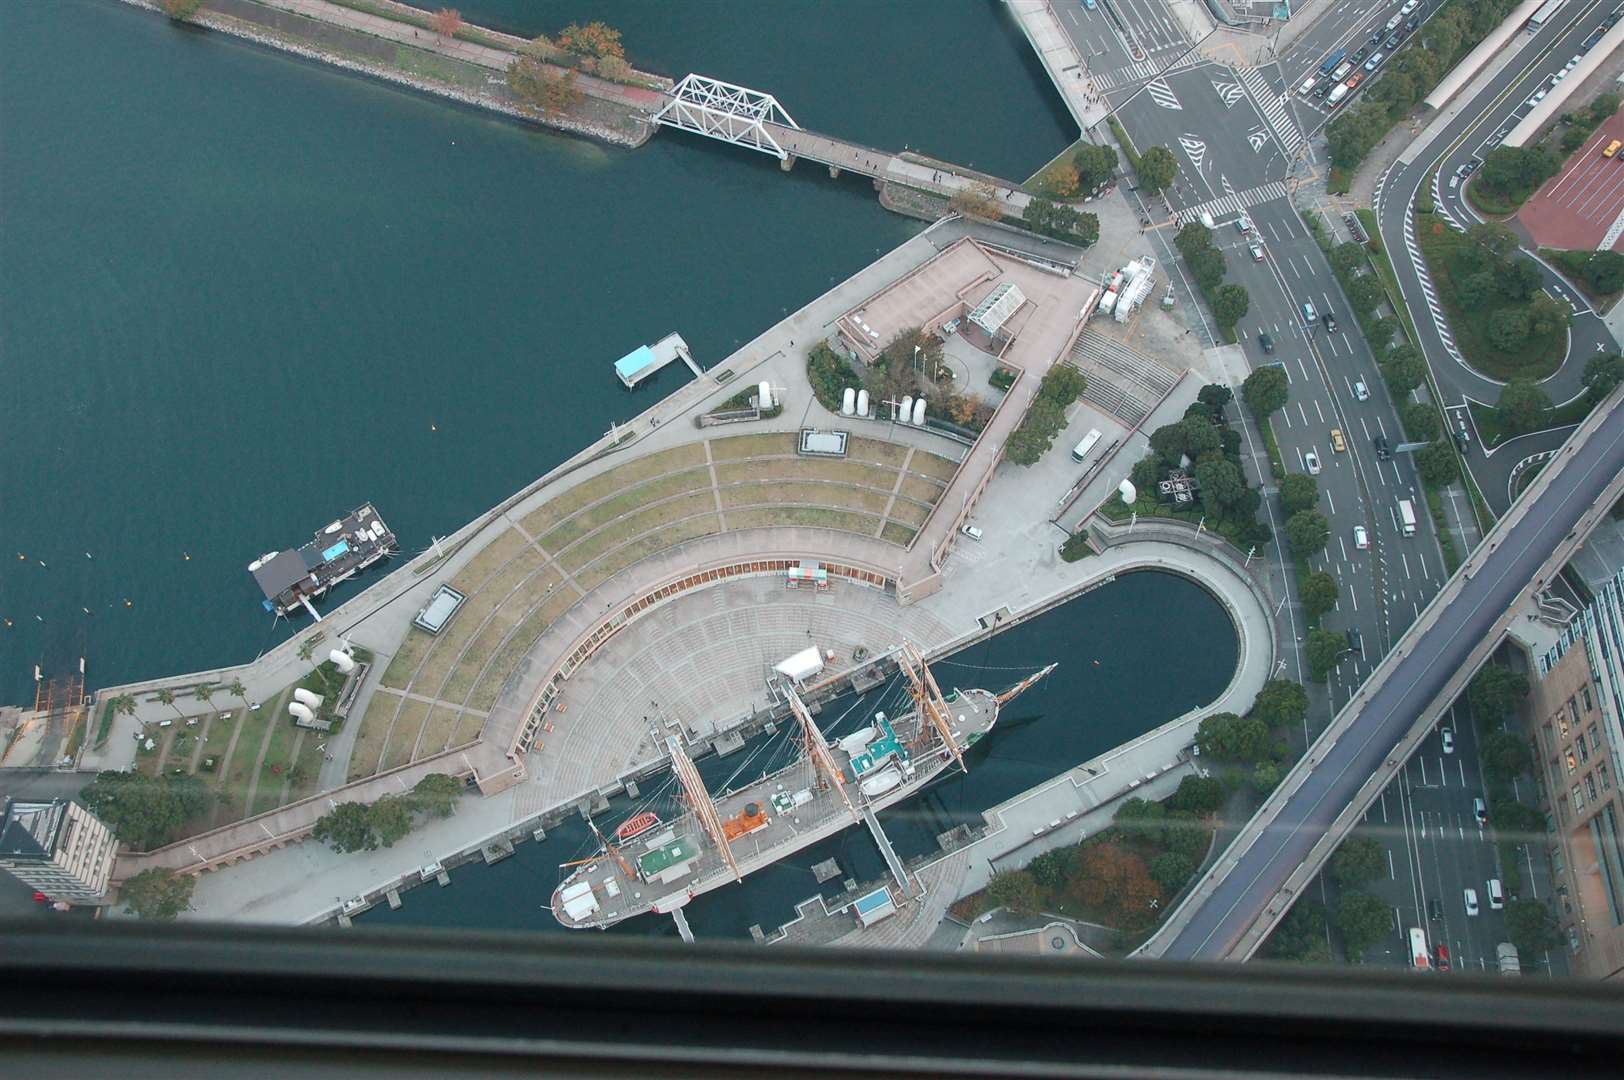 A view of the port area from the 69th floor of the Sky Tower, with the crescent of the Port Museum and the Nippon Maru sail training ship.